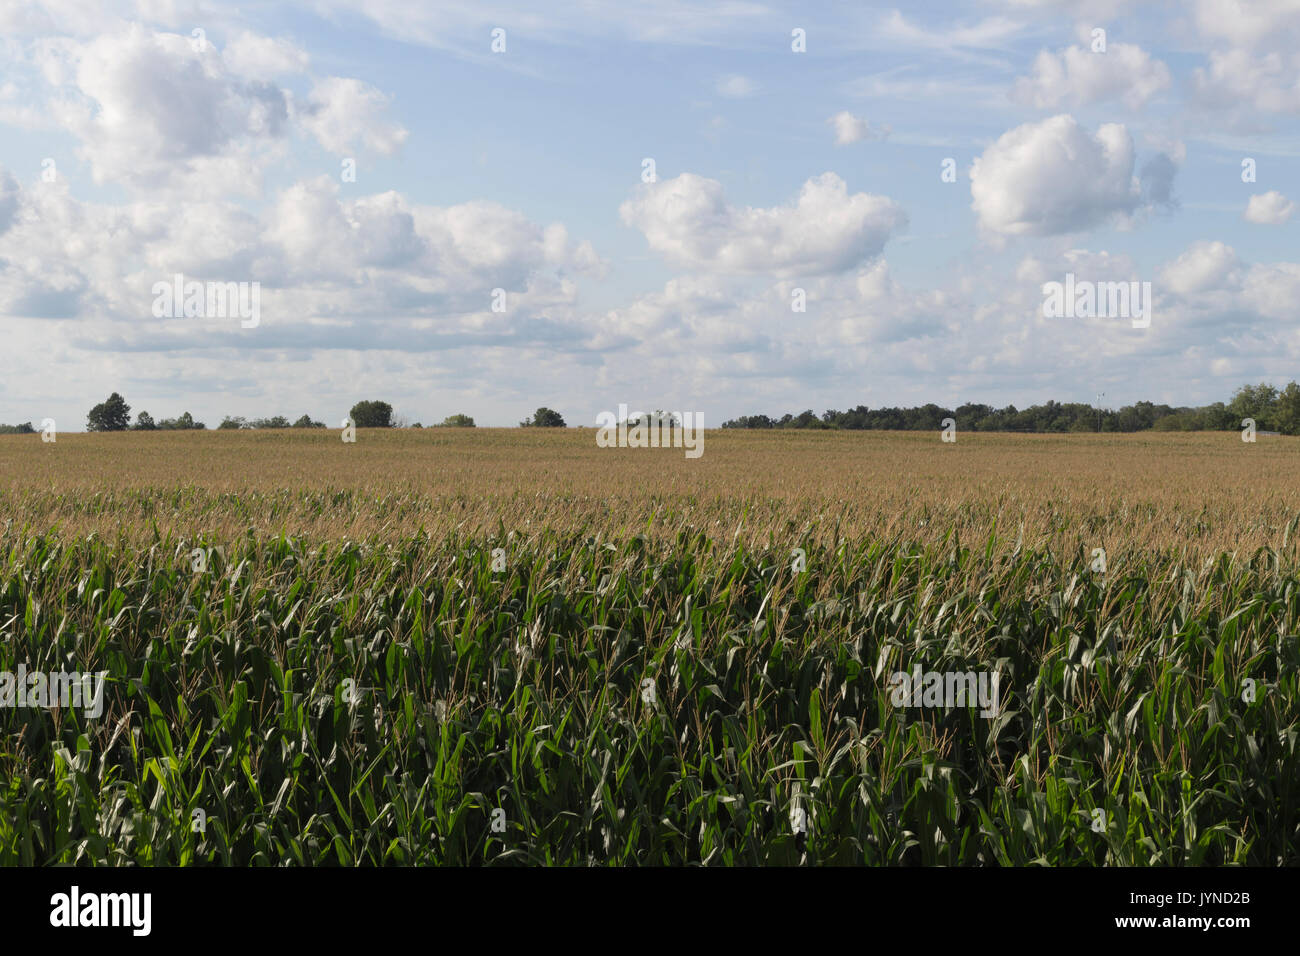 Beautiful day with puffy white clouds over a corn field. Stock Photo